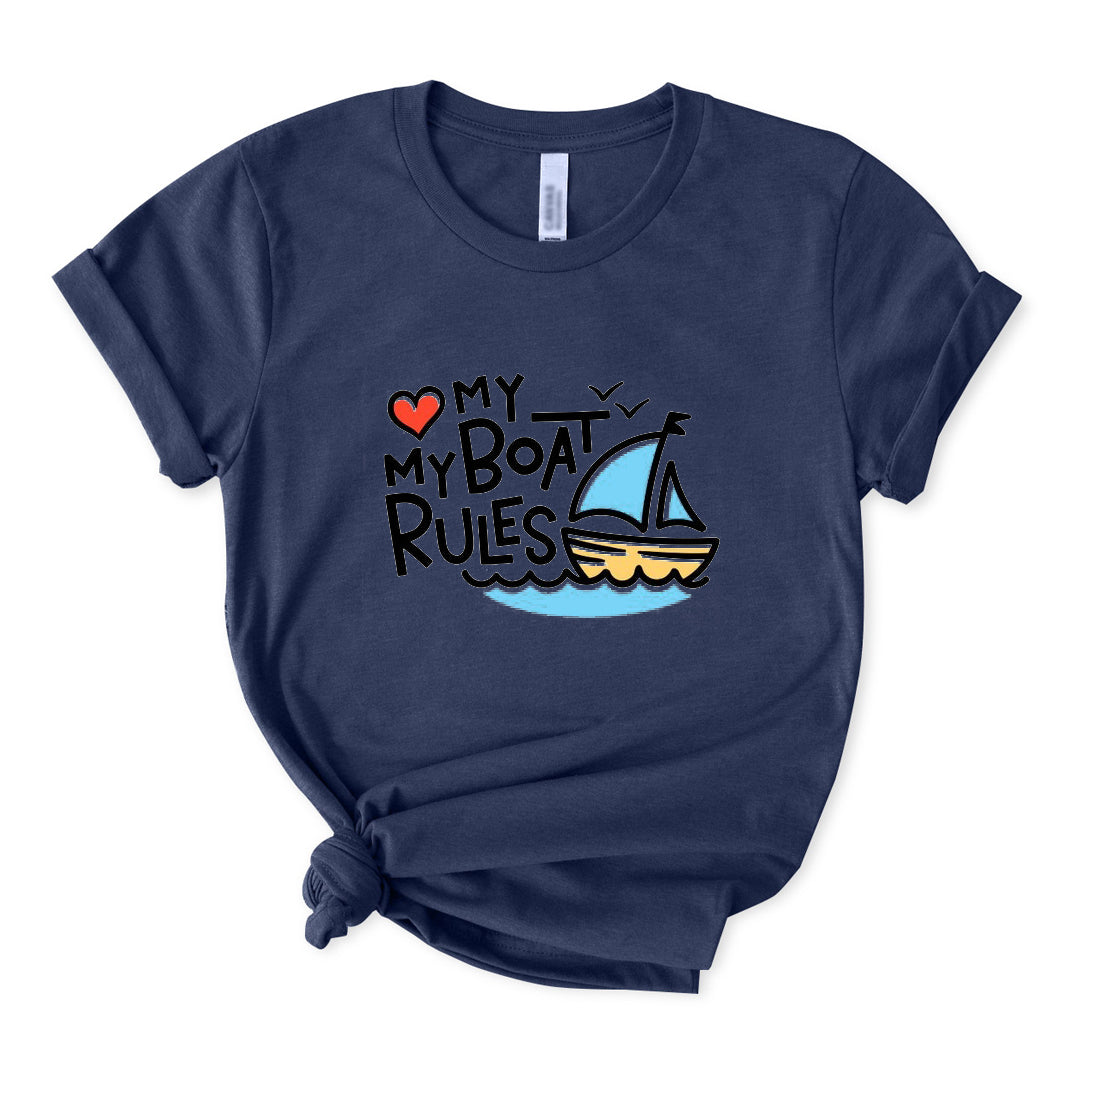 My Boat My Rules T-Shirt for Women